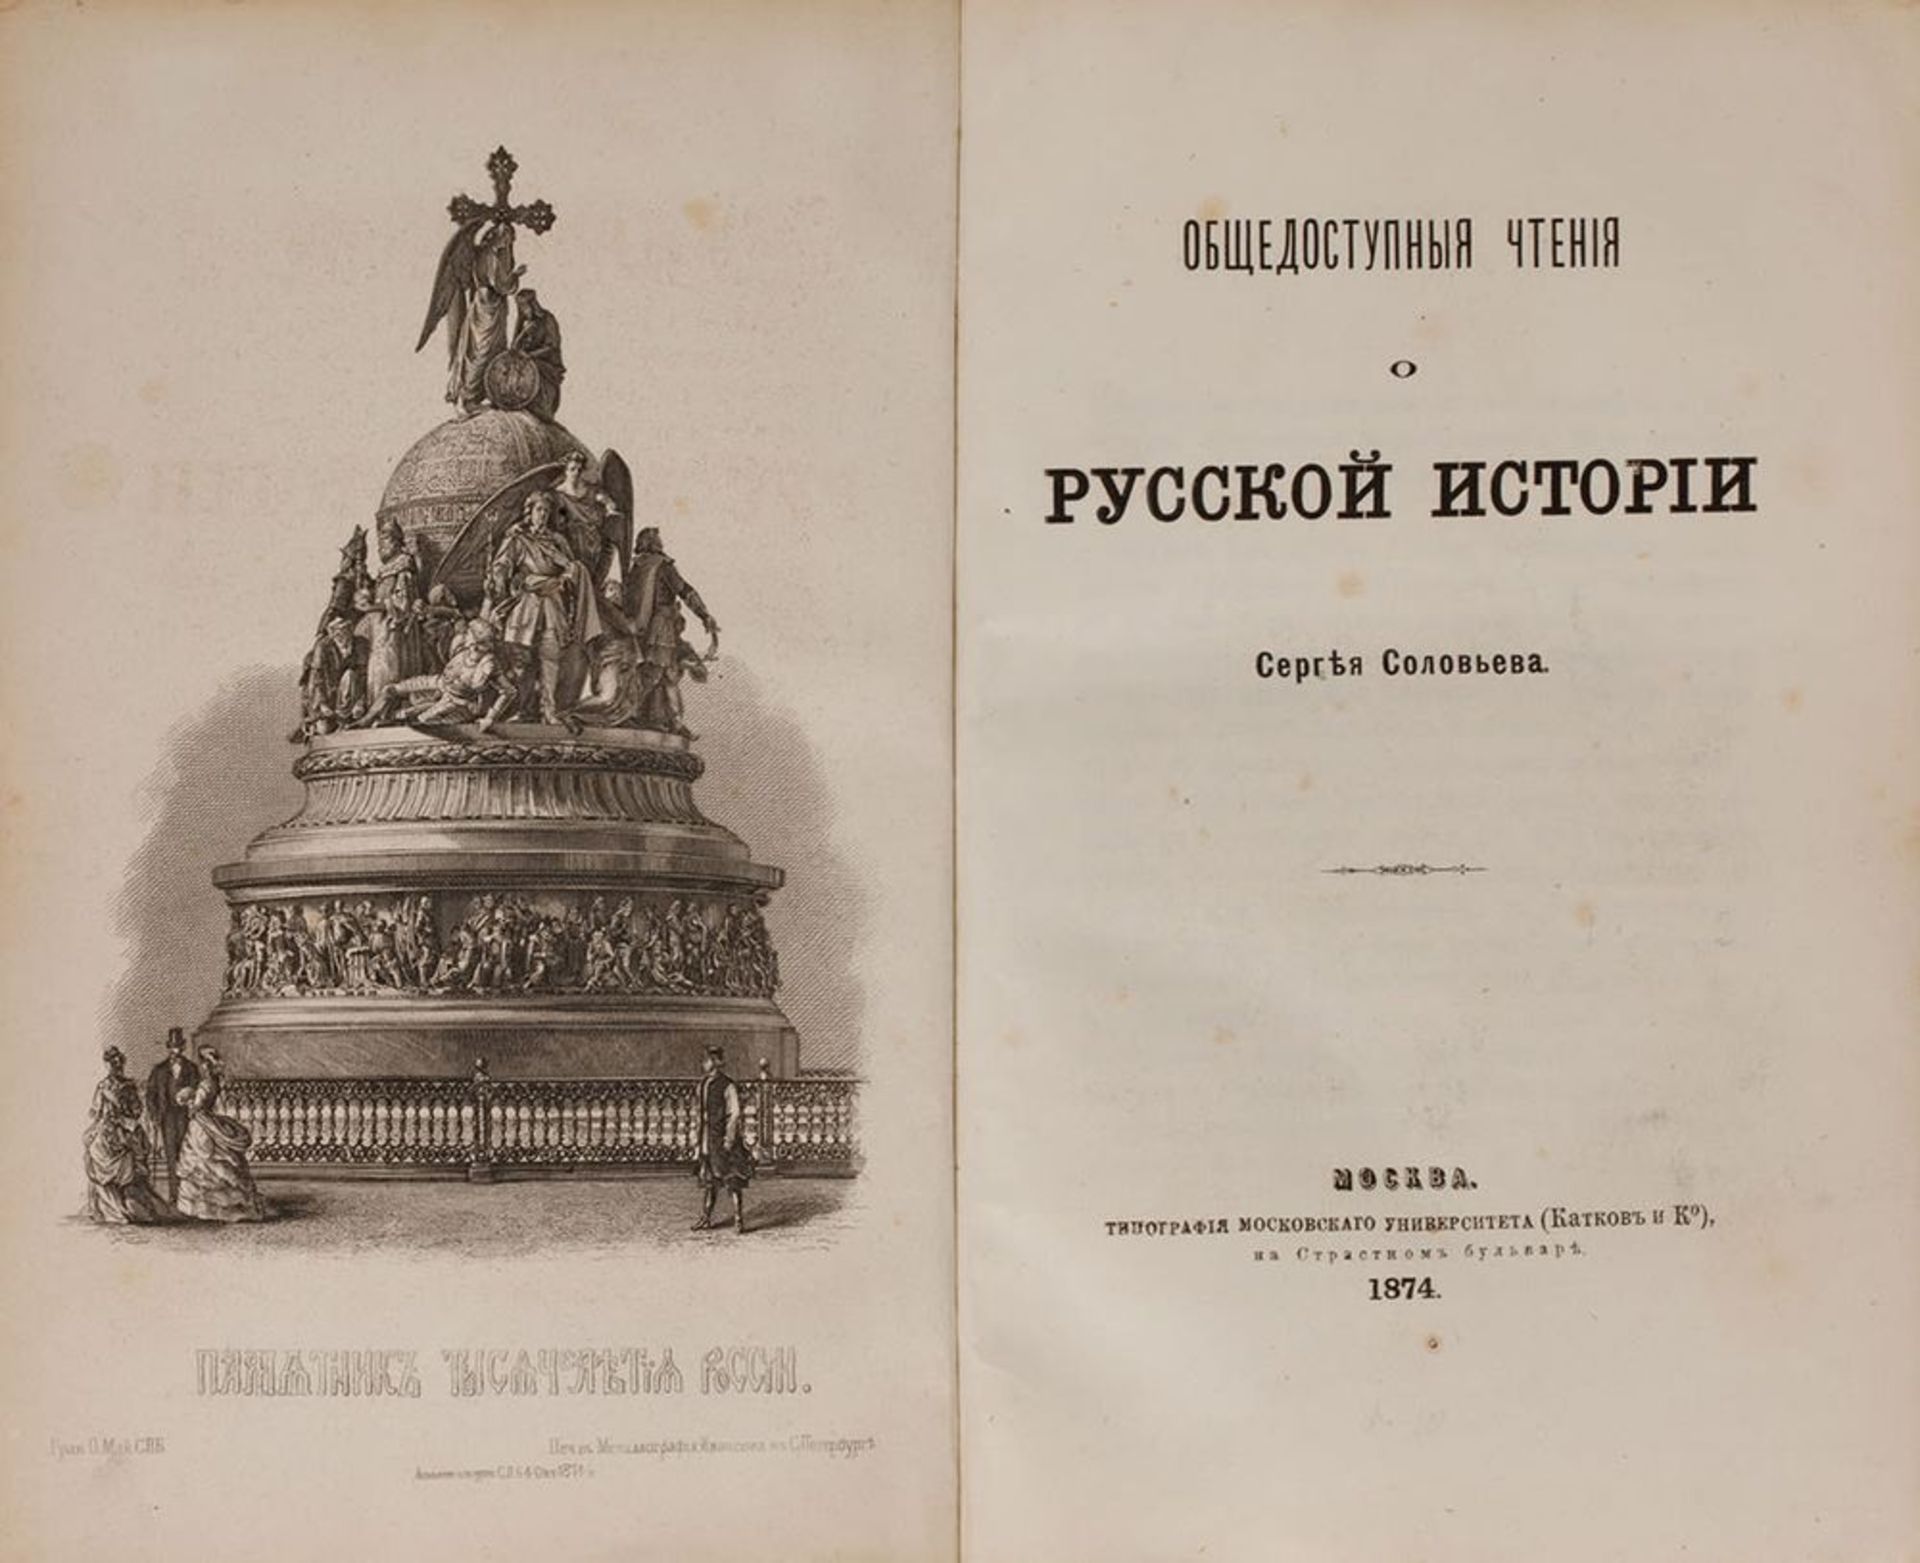 SOLOVIEV, SERGEY. Popular lectures on Russian history. Moscow University press, [...] - Bild 2 aus 2